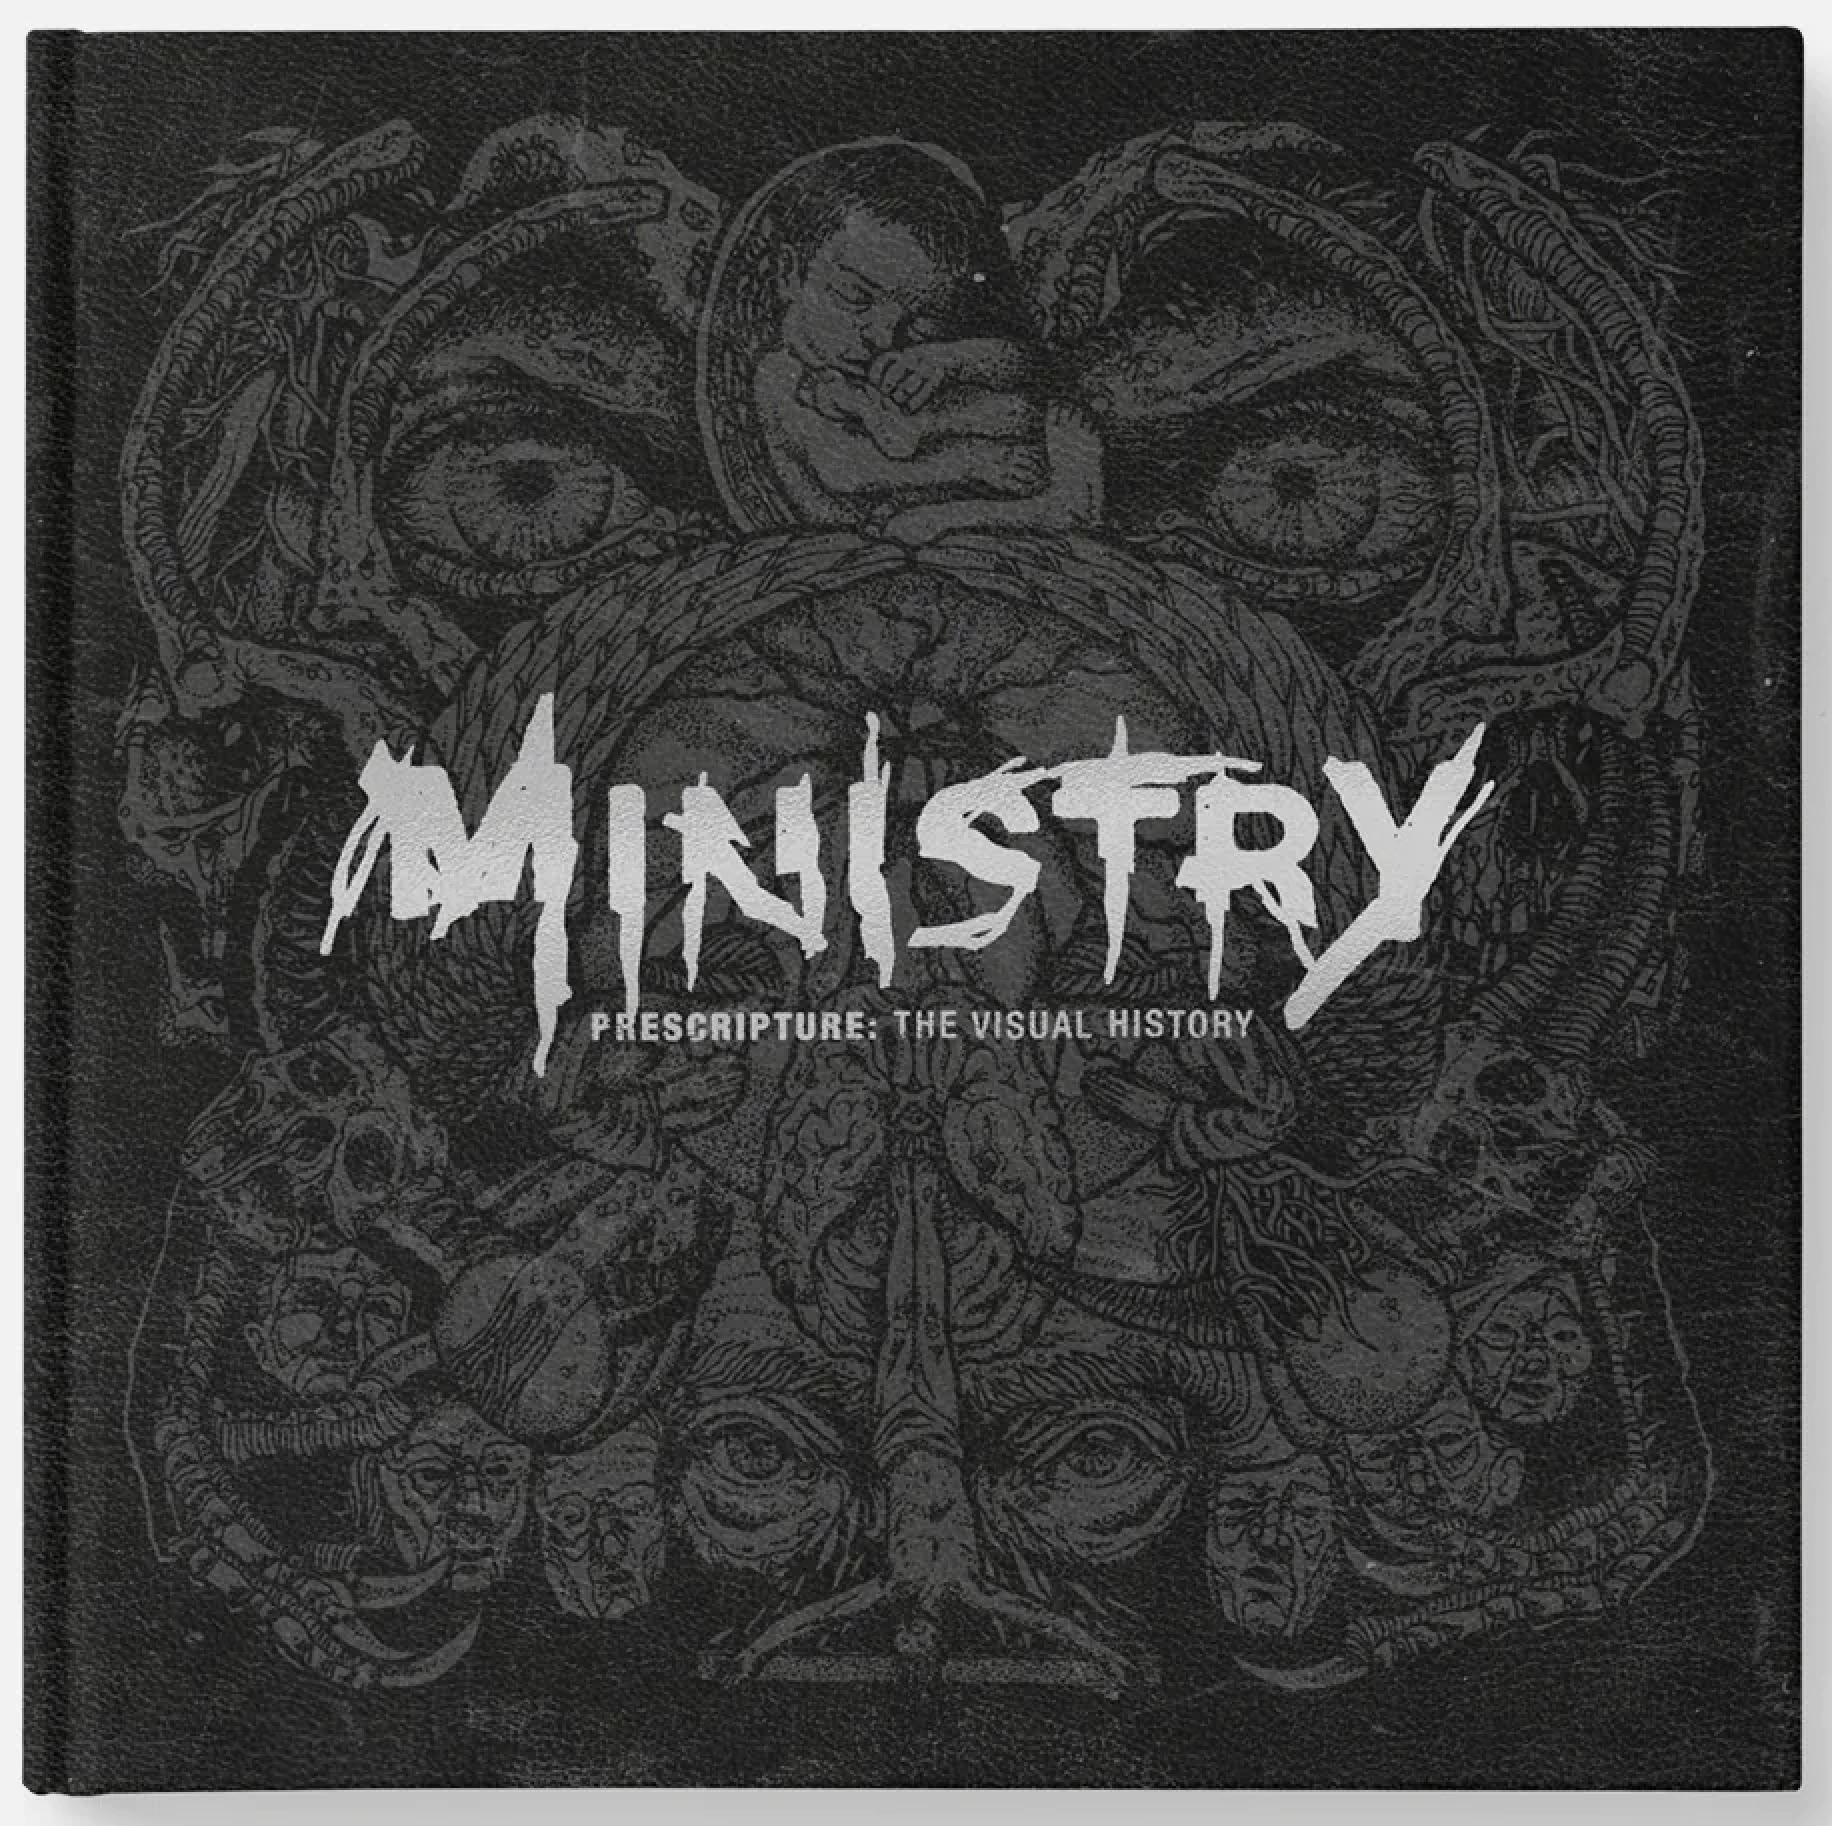 MINISTRY (MELODIC VIRTUE)